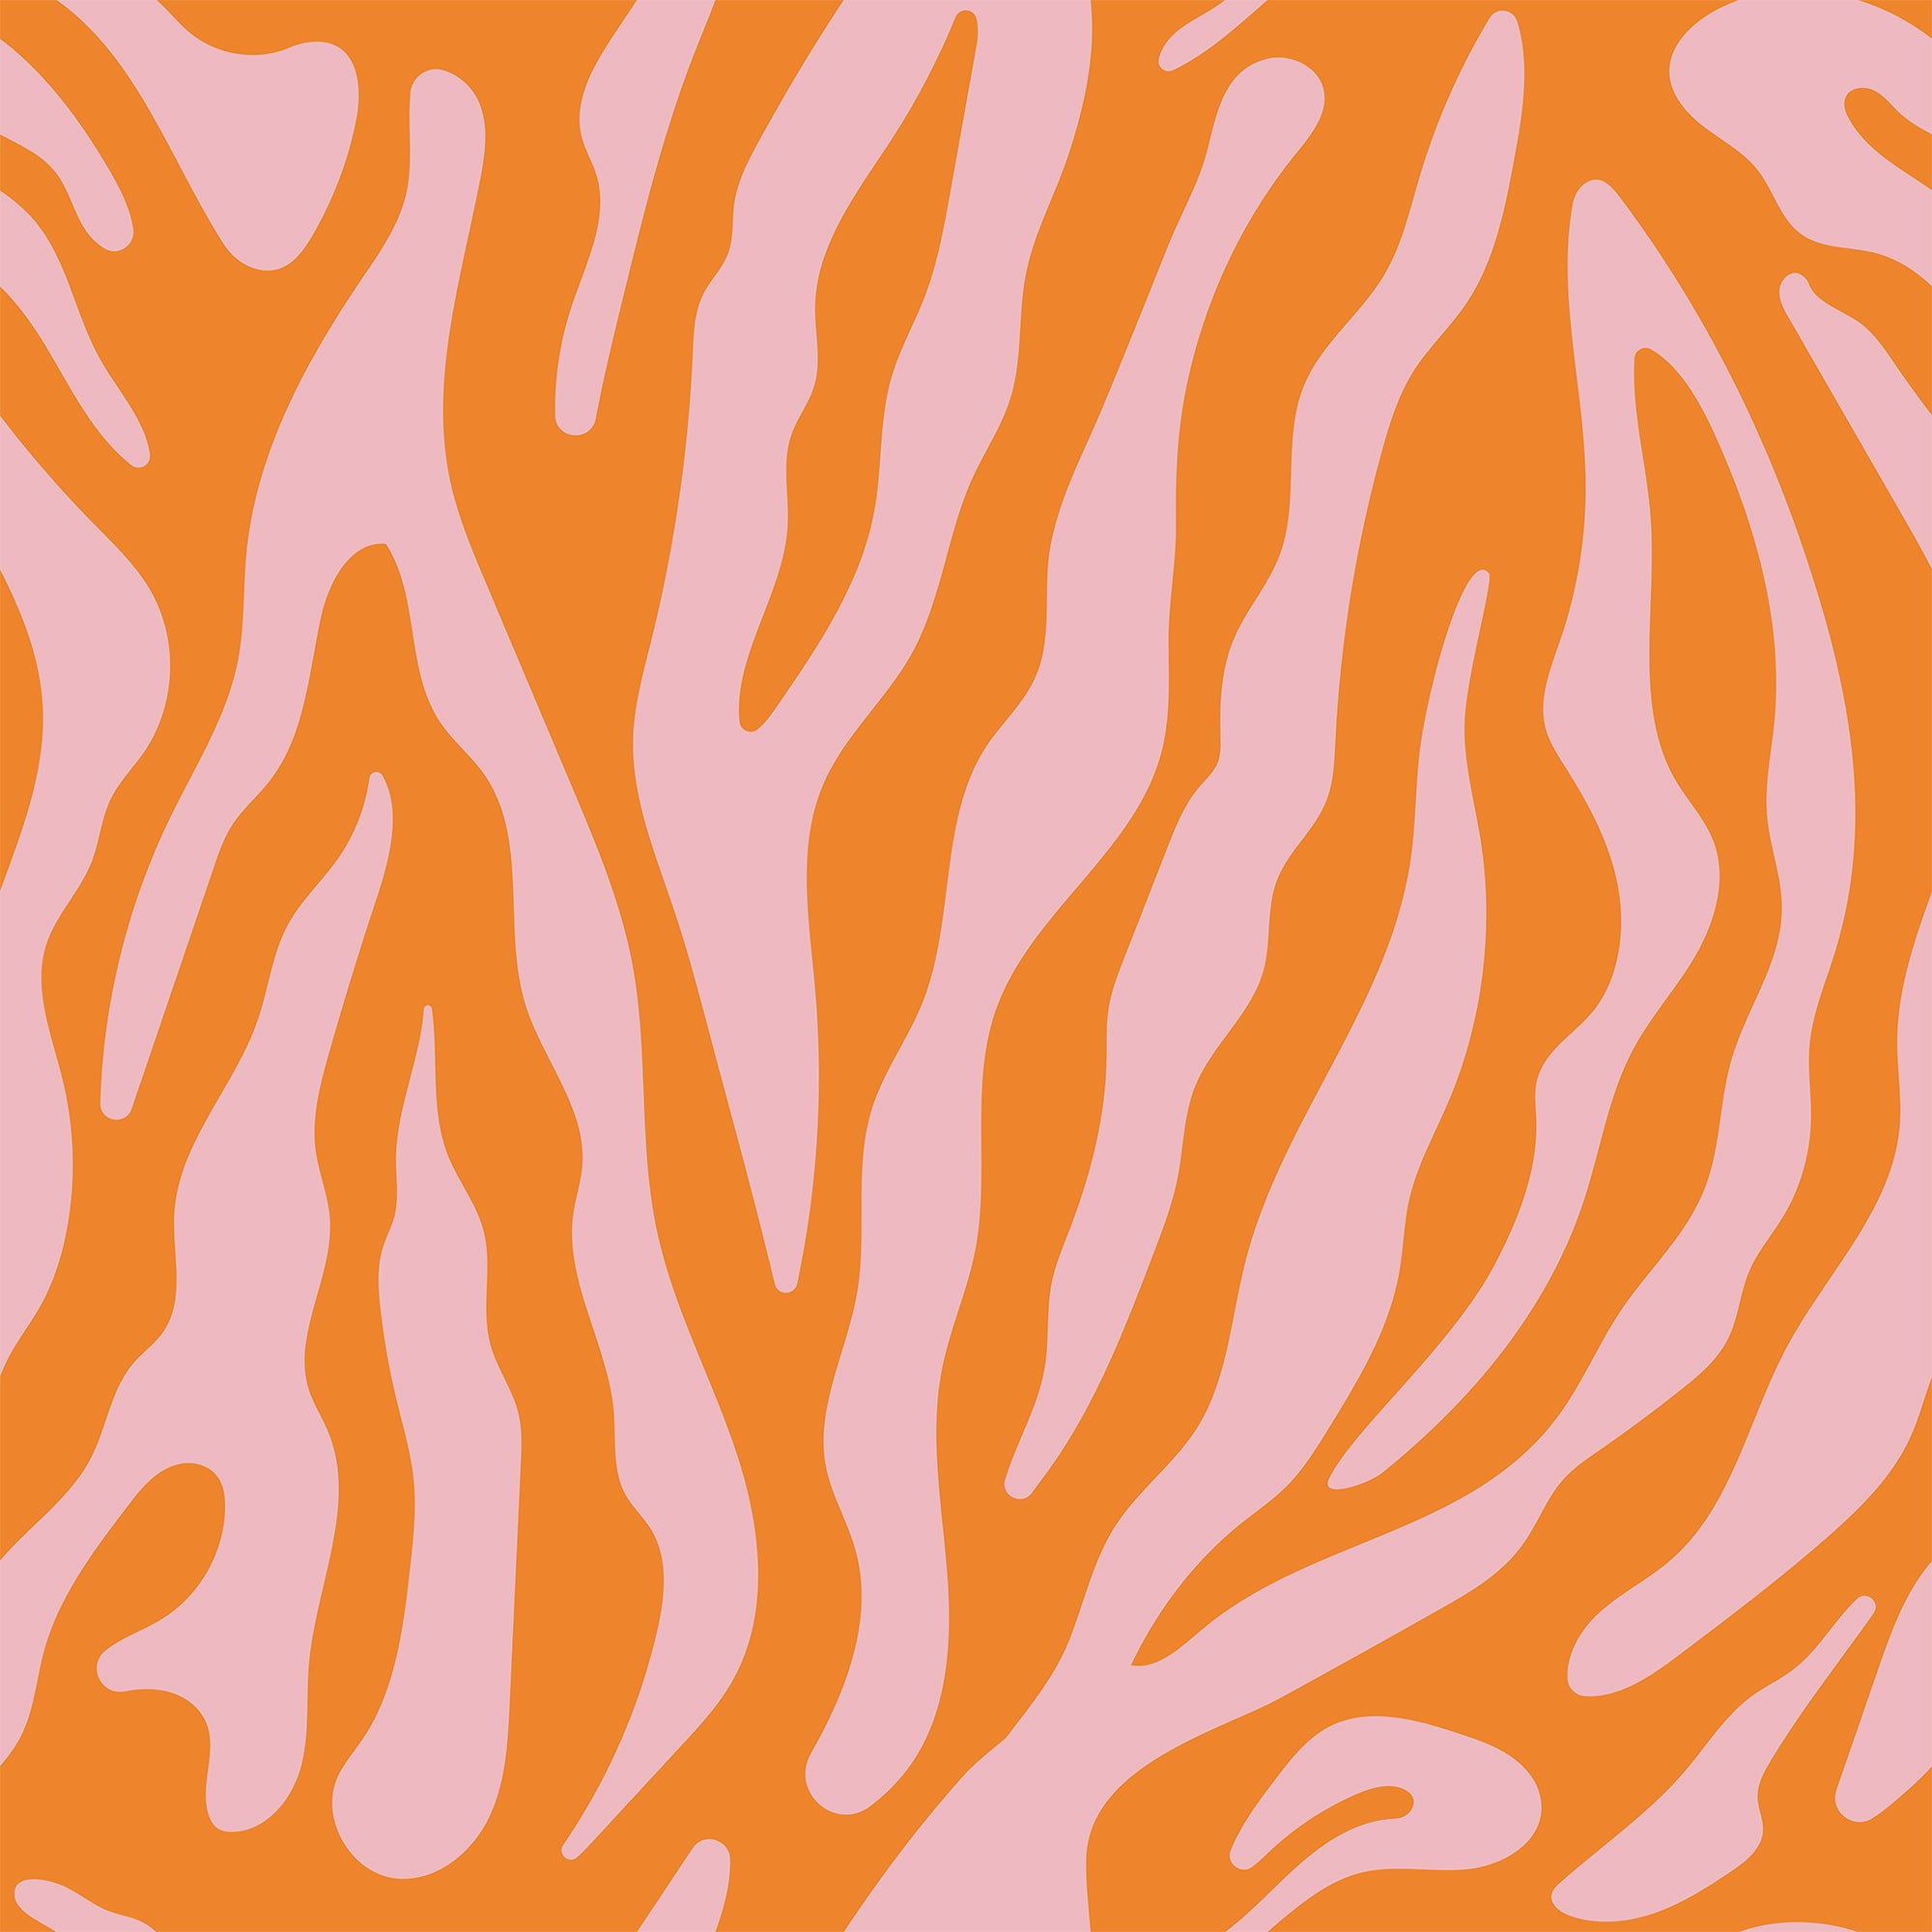 Pink Zebra Fabric Wallpaper and Home Decor  Spoonflower